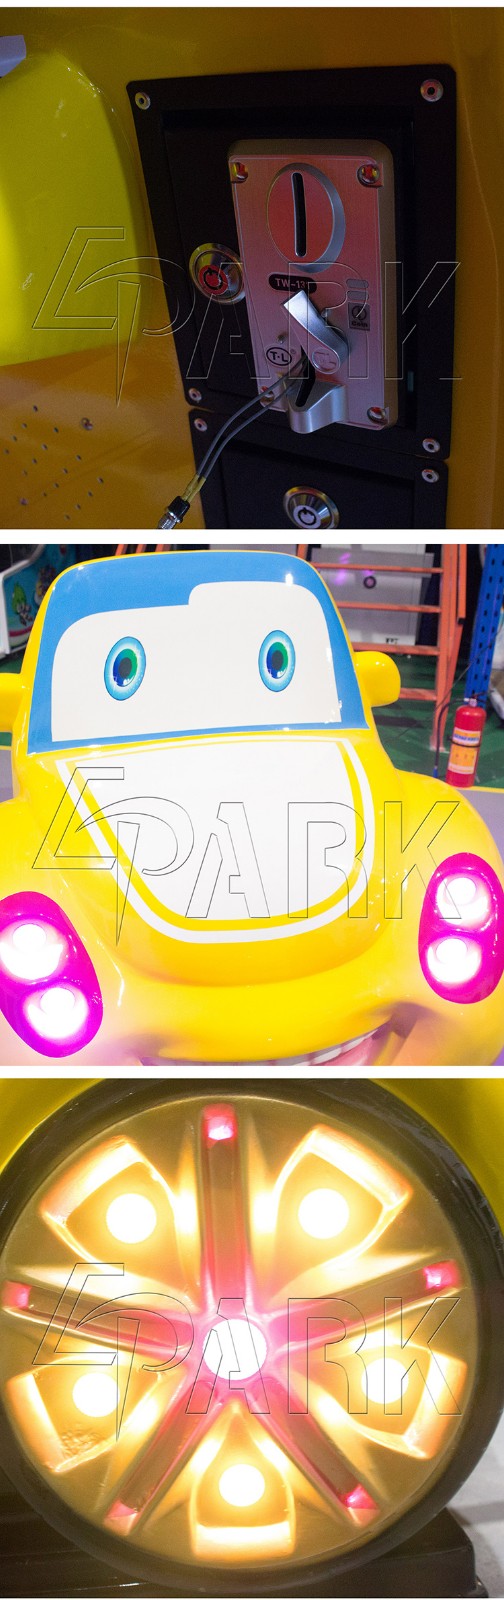 Coin Operated 3d Yellow Car Kids Video Racing Swing Car Game Machine Amusement Park Kiddie Rides